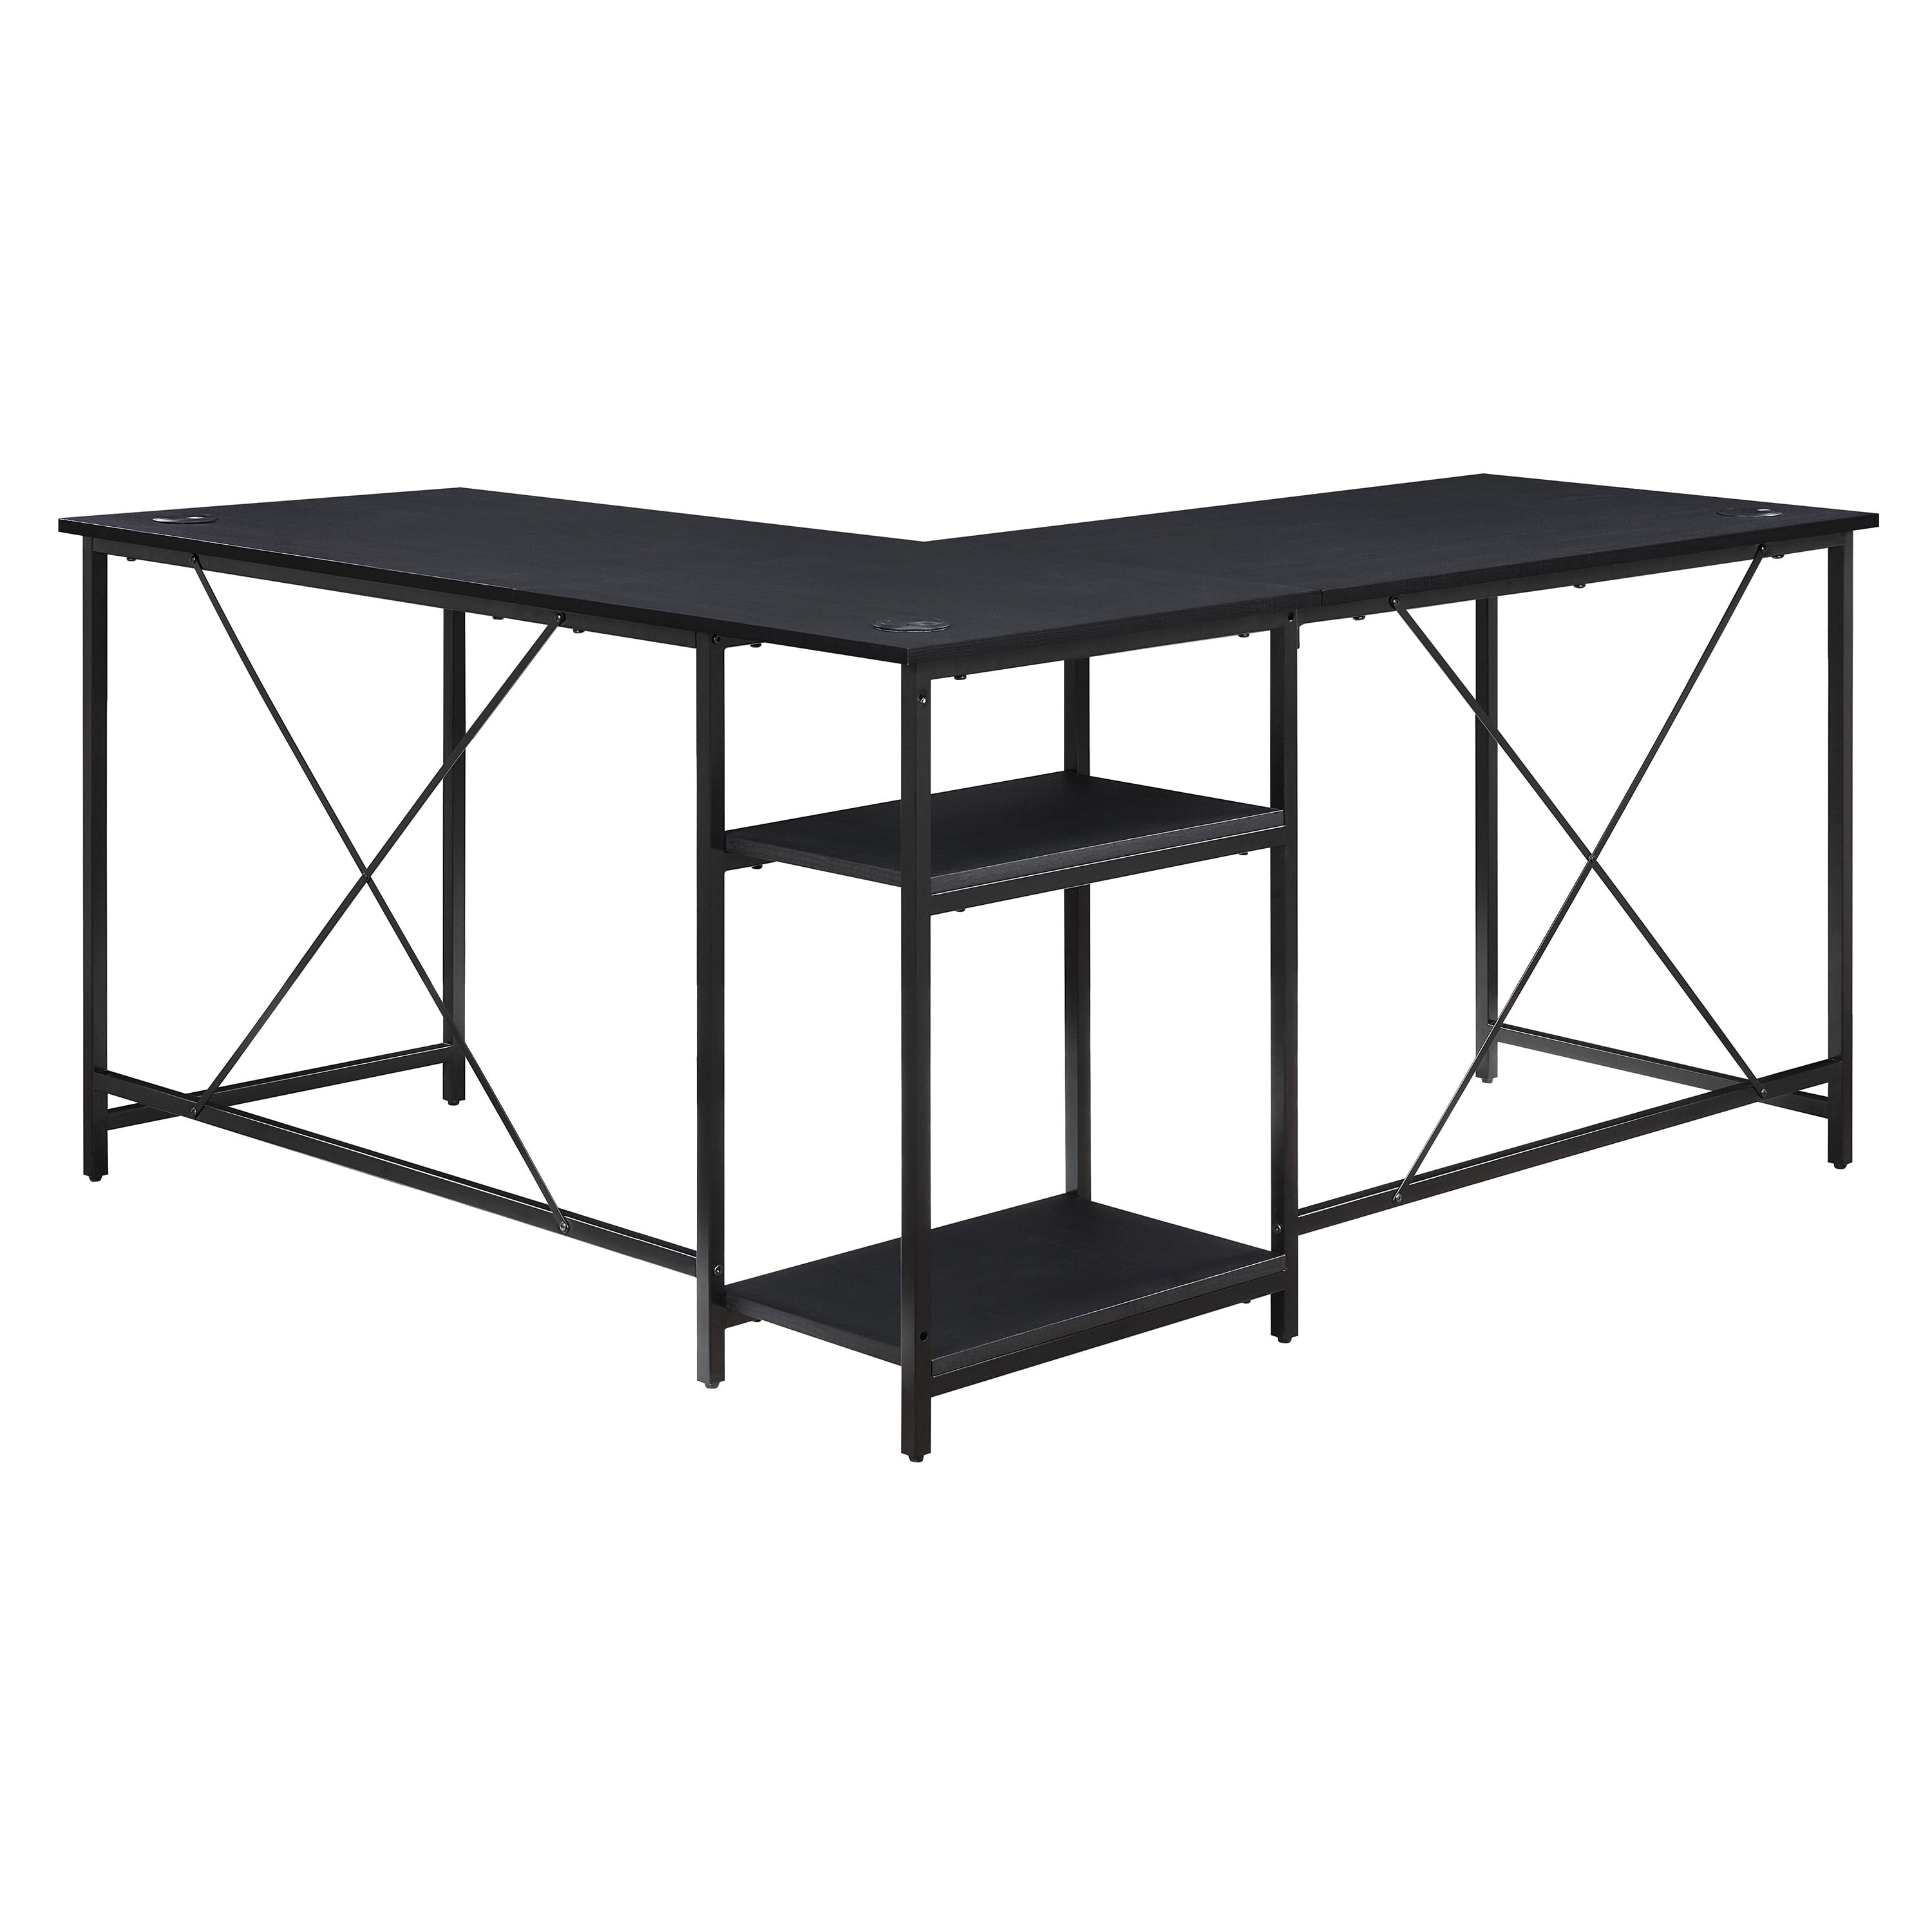 Mainstays Two-Way Convertible Desk with Lower Storage Shelf, Charcoal Finish and Black Metal Frame - 3